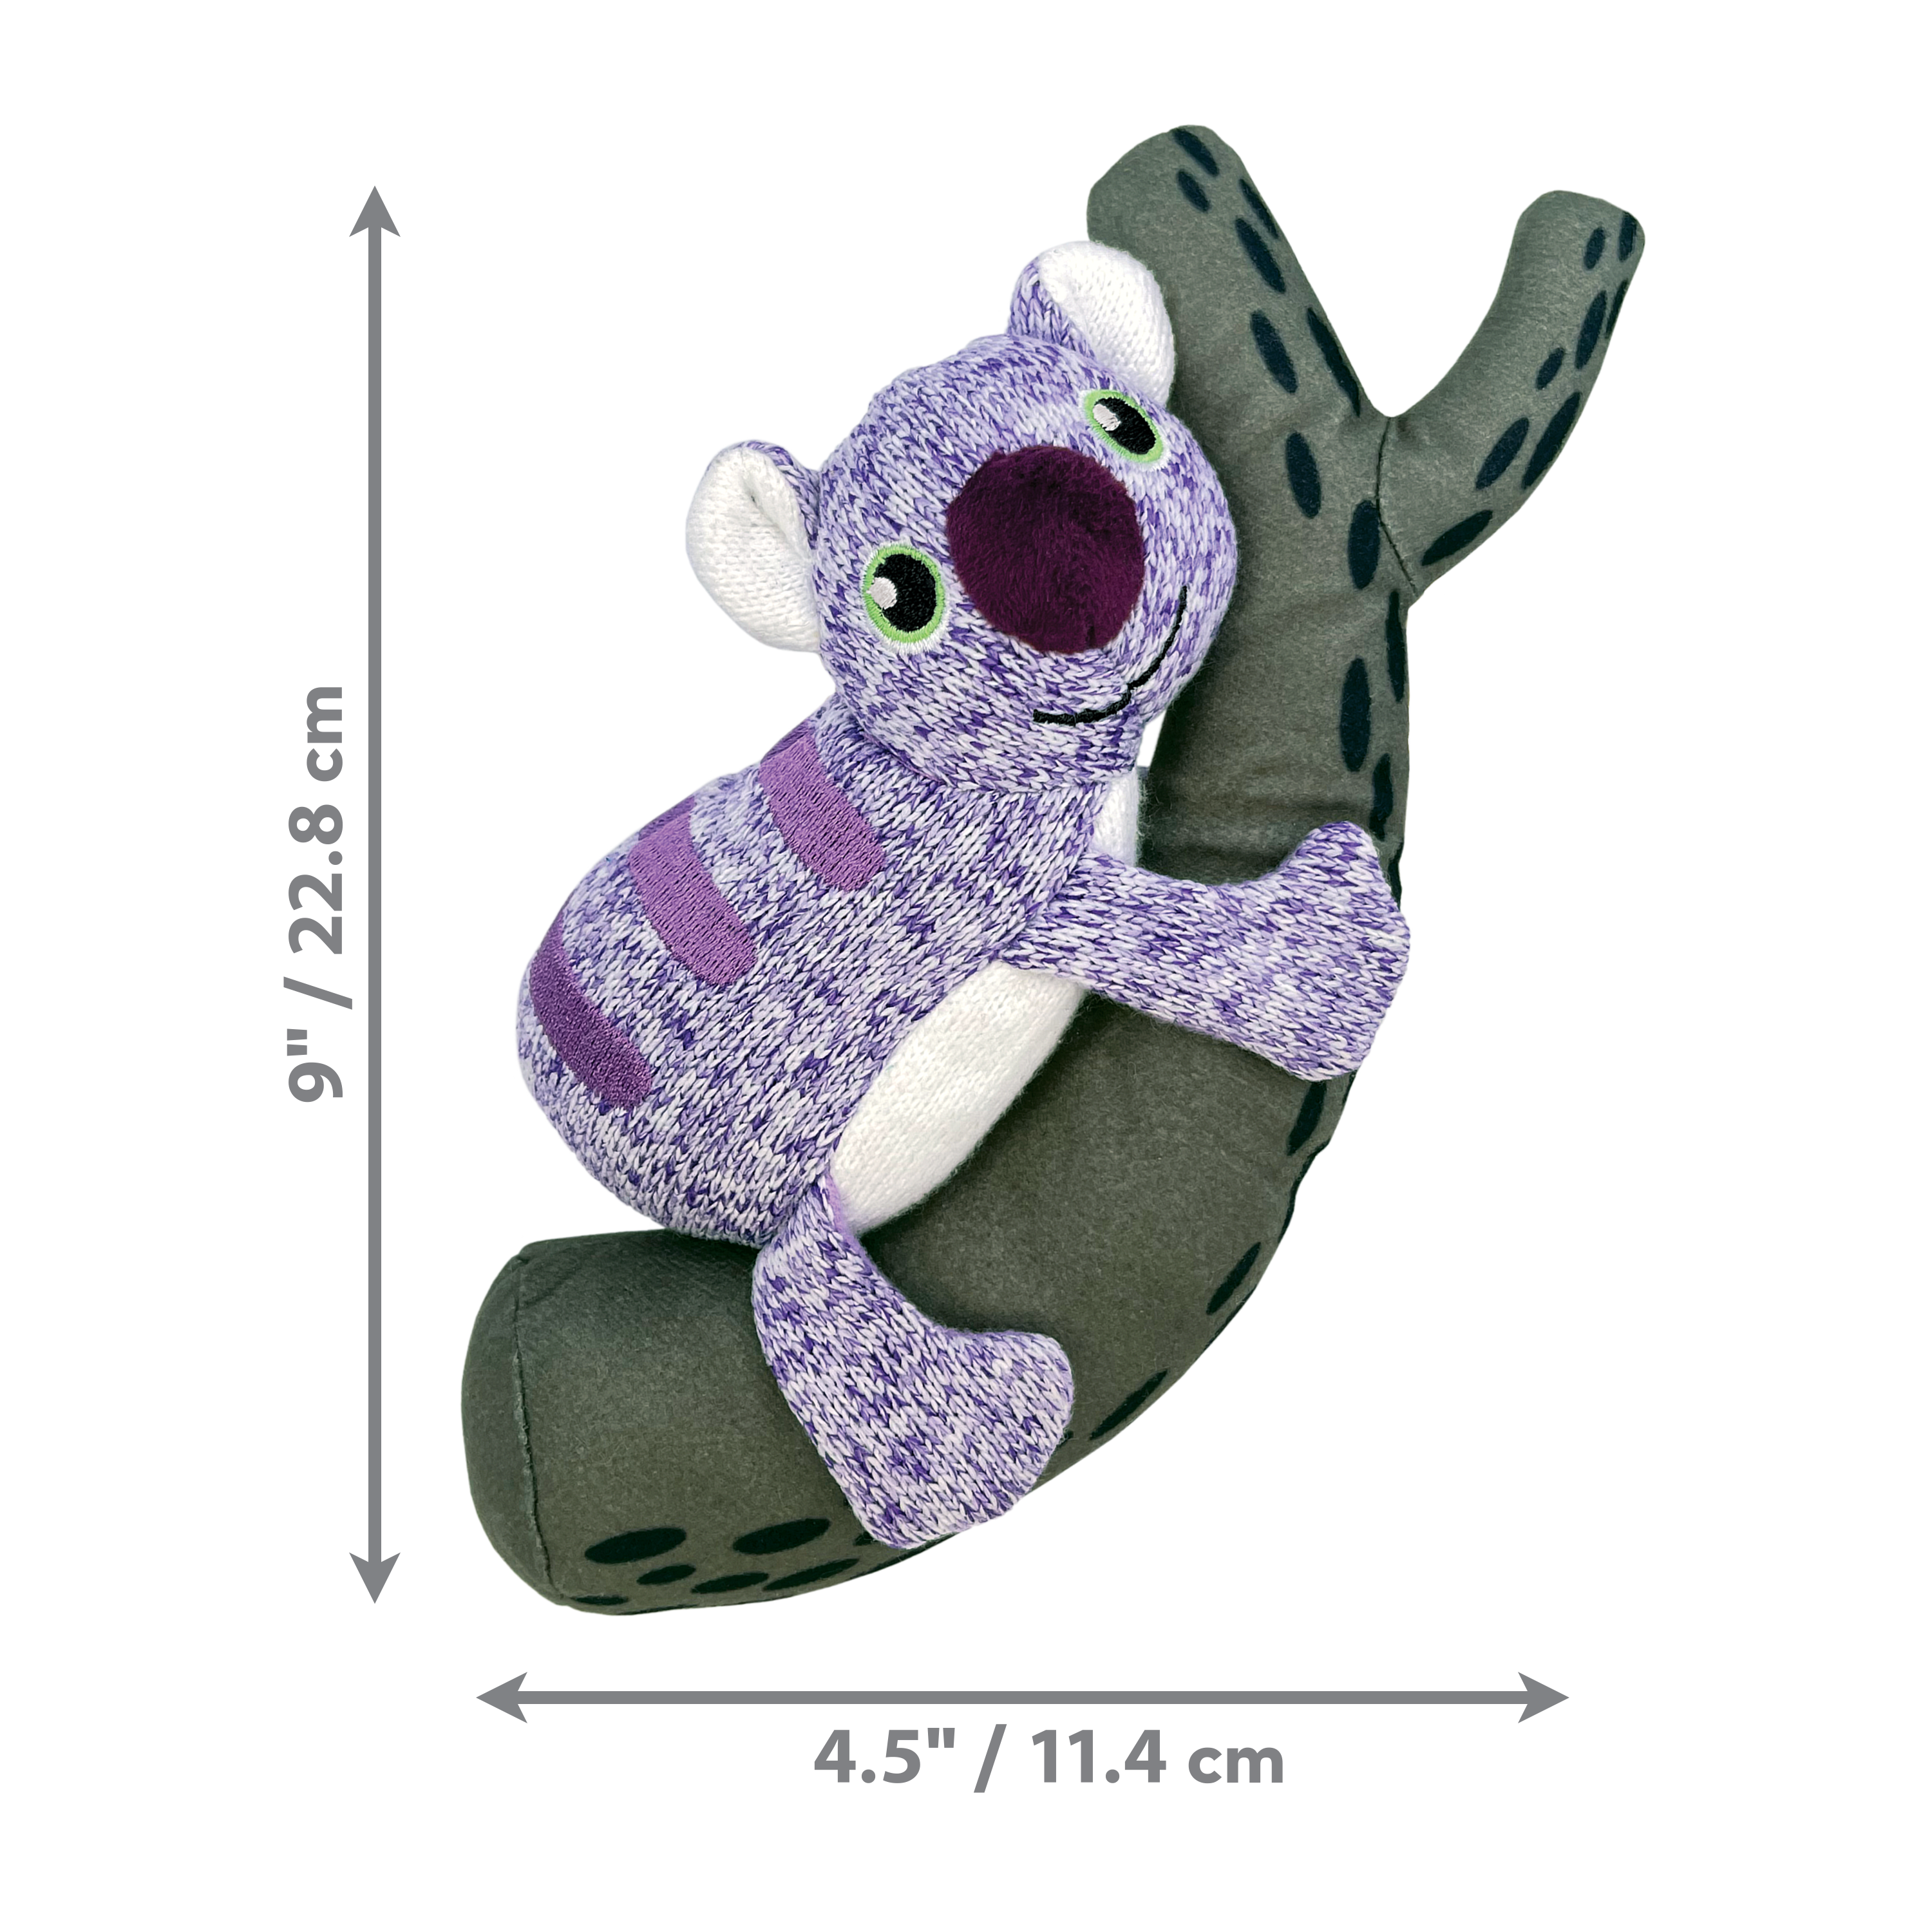 Pull-A-Partz Pals Koala dimoffpack product image